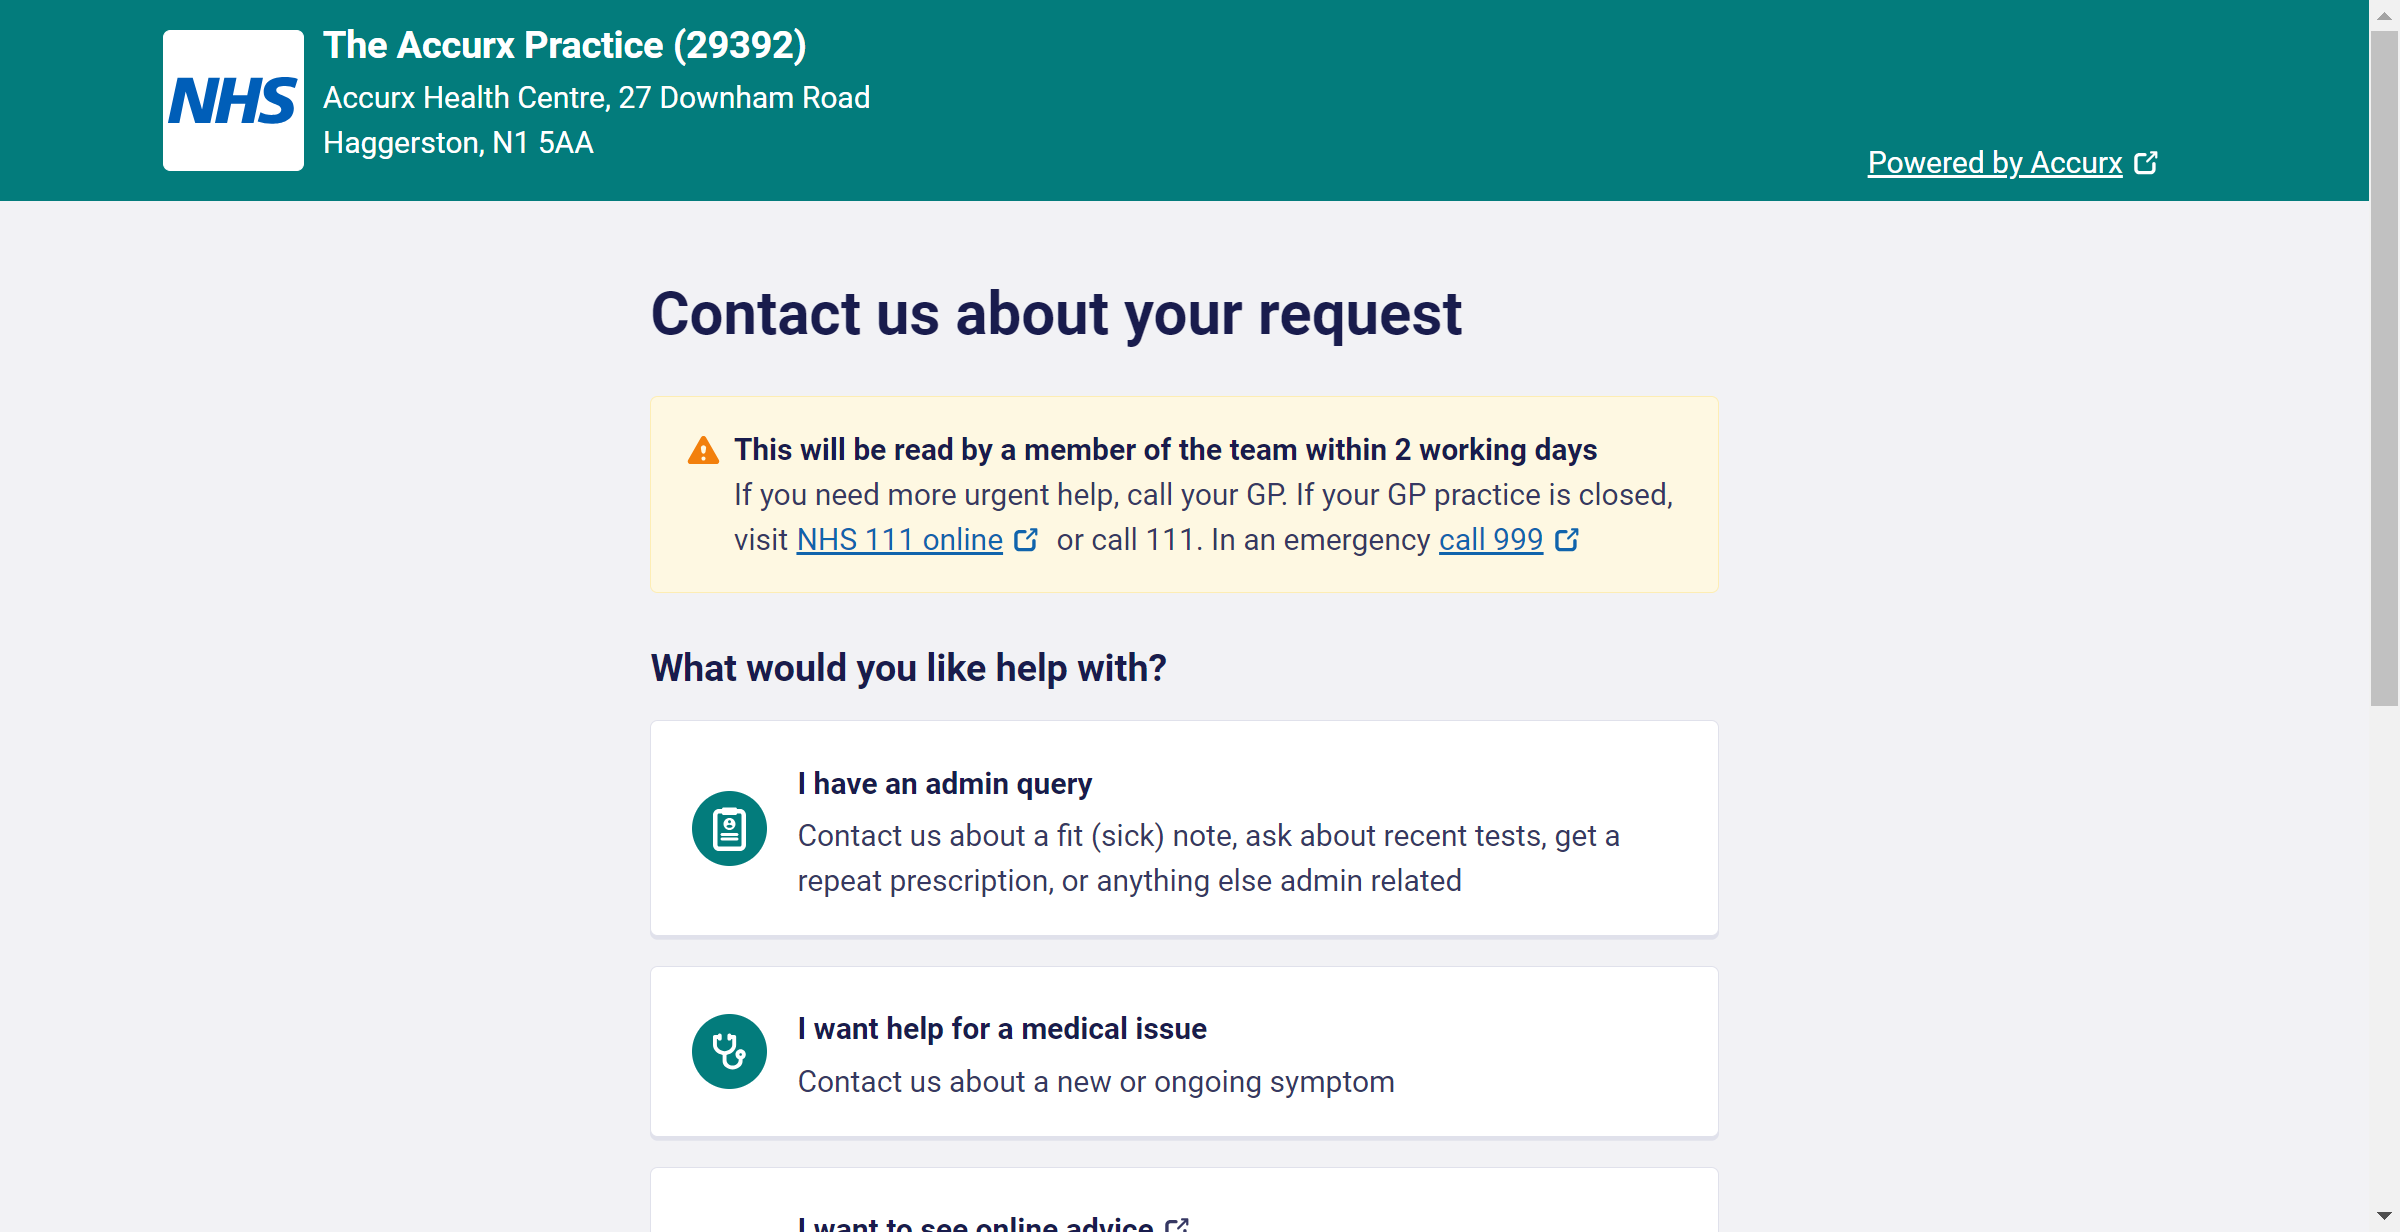 Patients can check that they are submitting a request for the correct practice